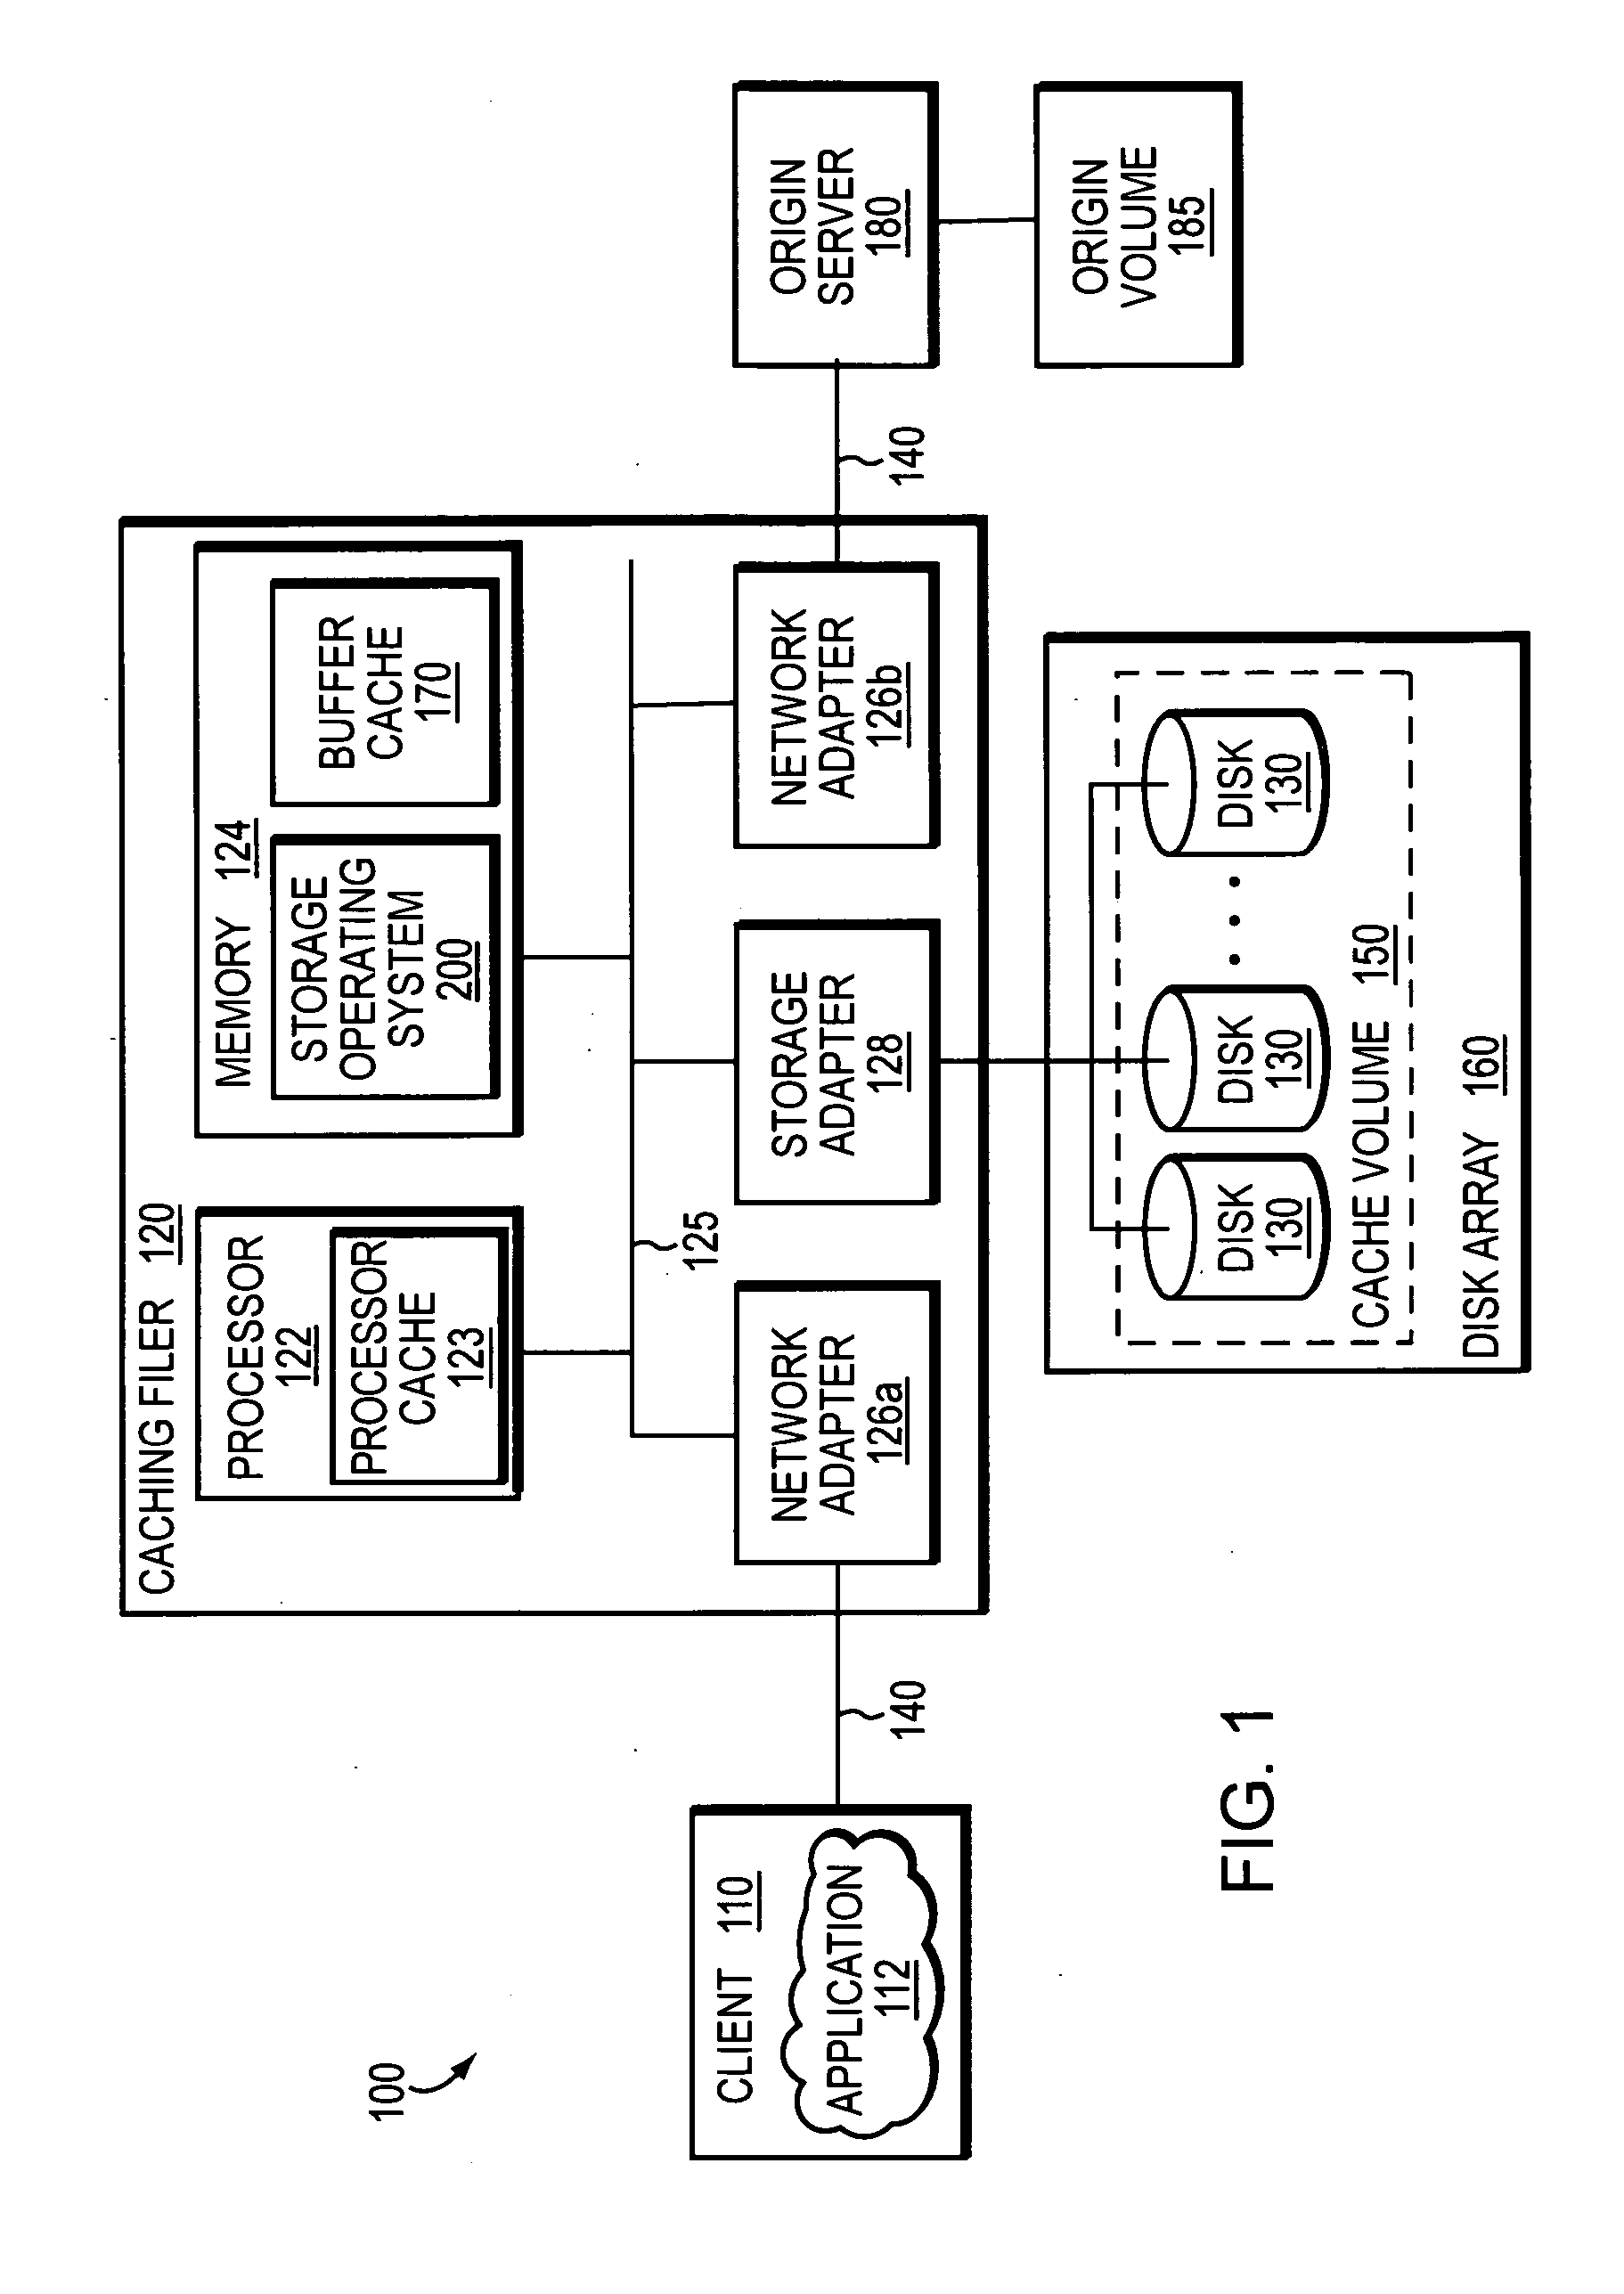 System and method for caching network file systems